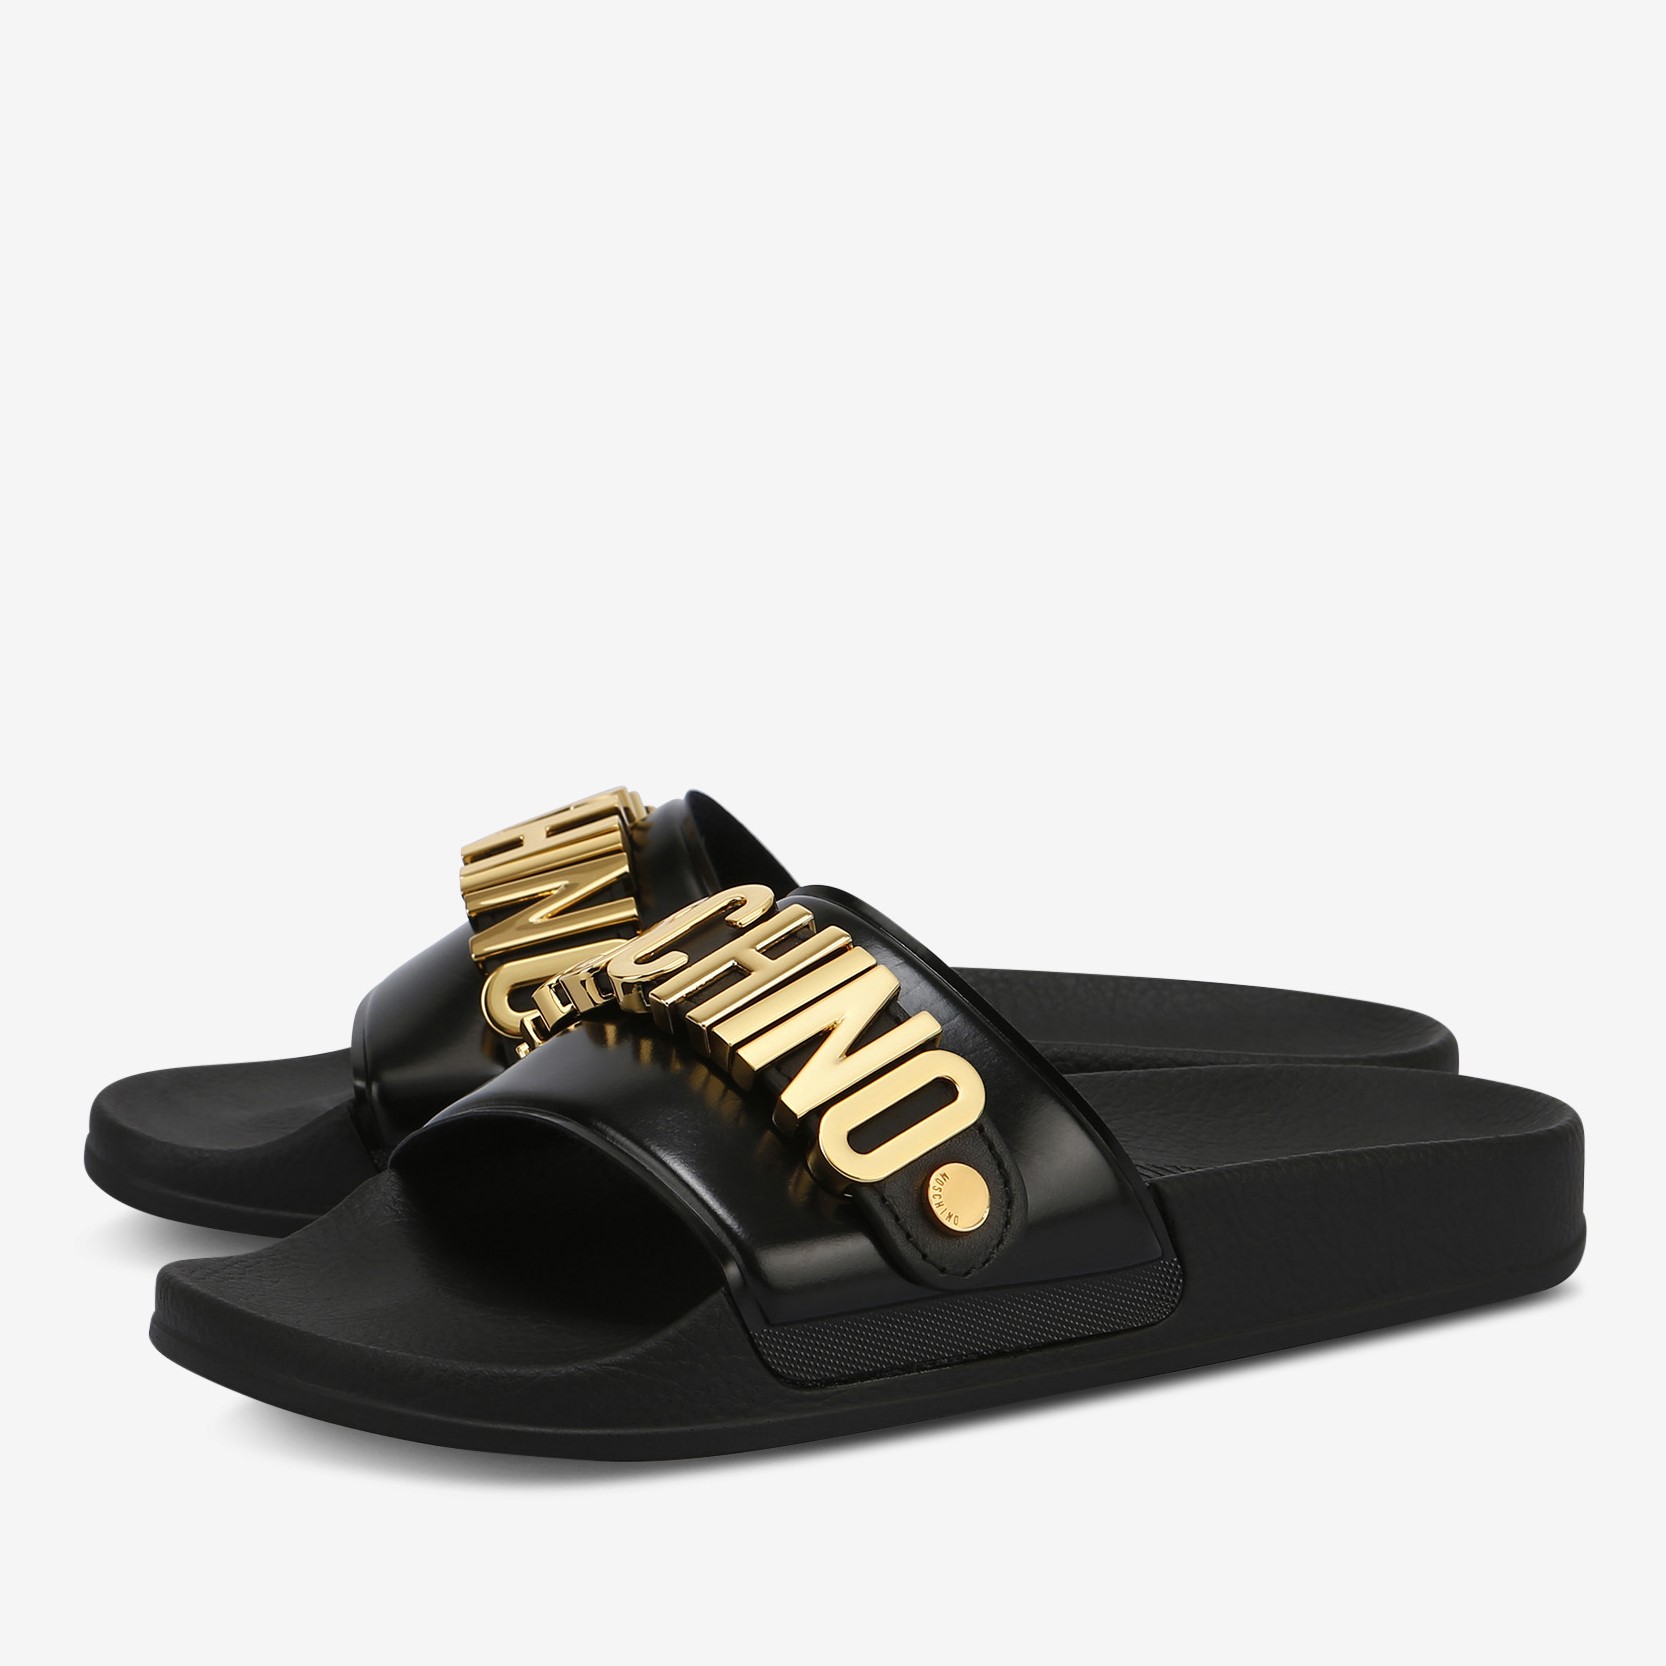 MOSCHINO Slippers Black Gold Buckle